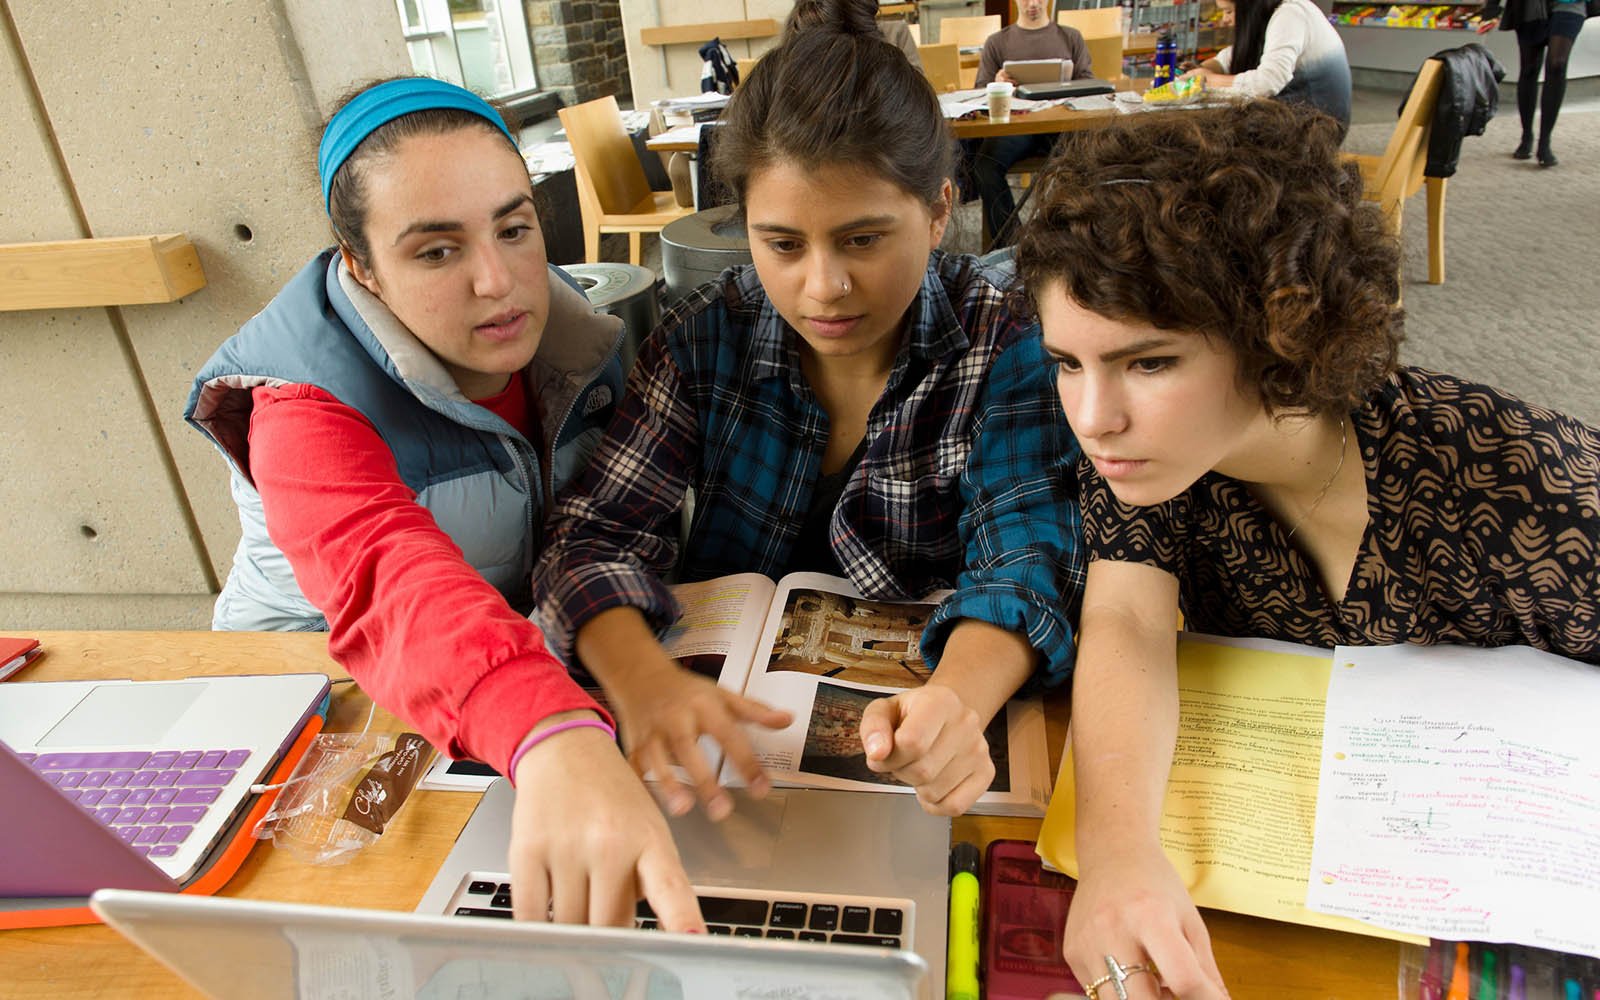 Three students looking at a laptop